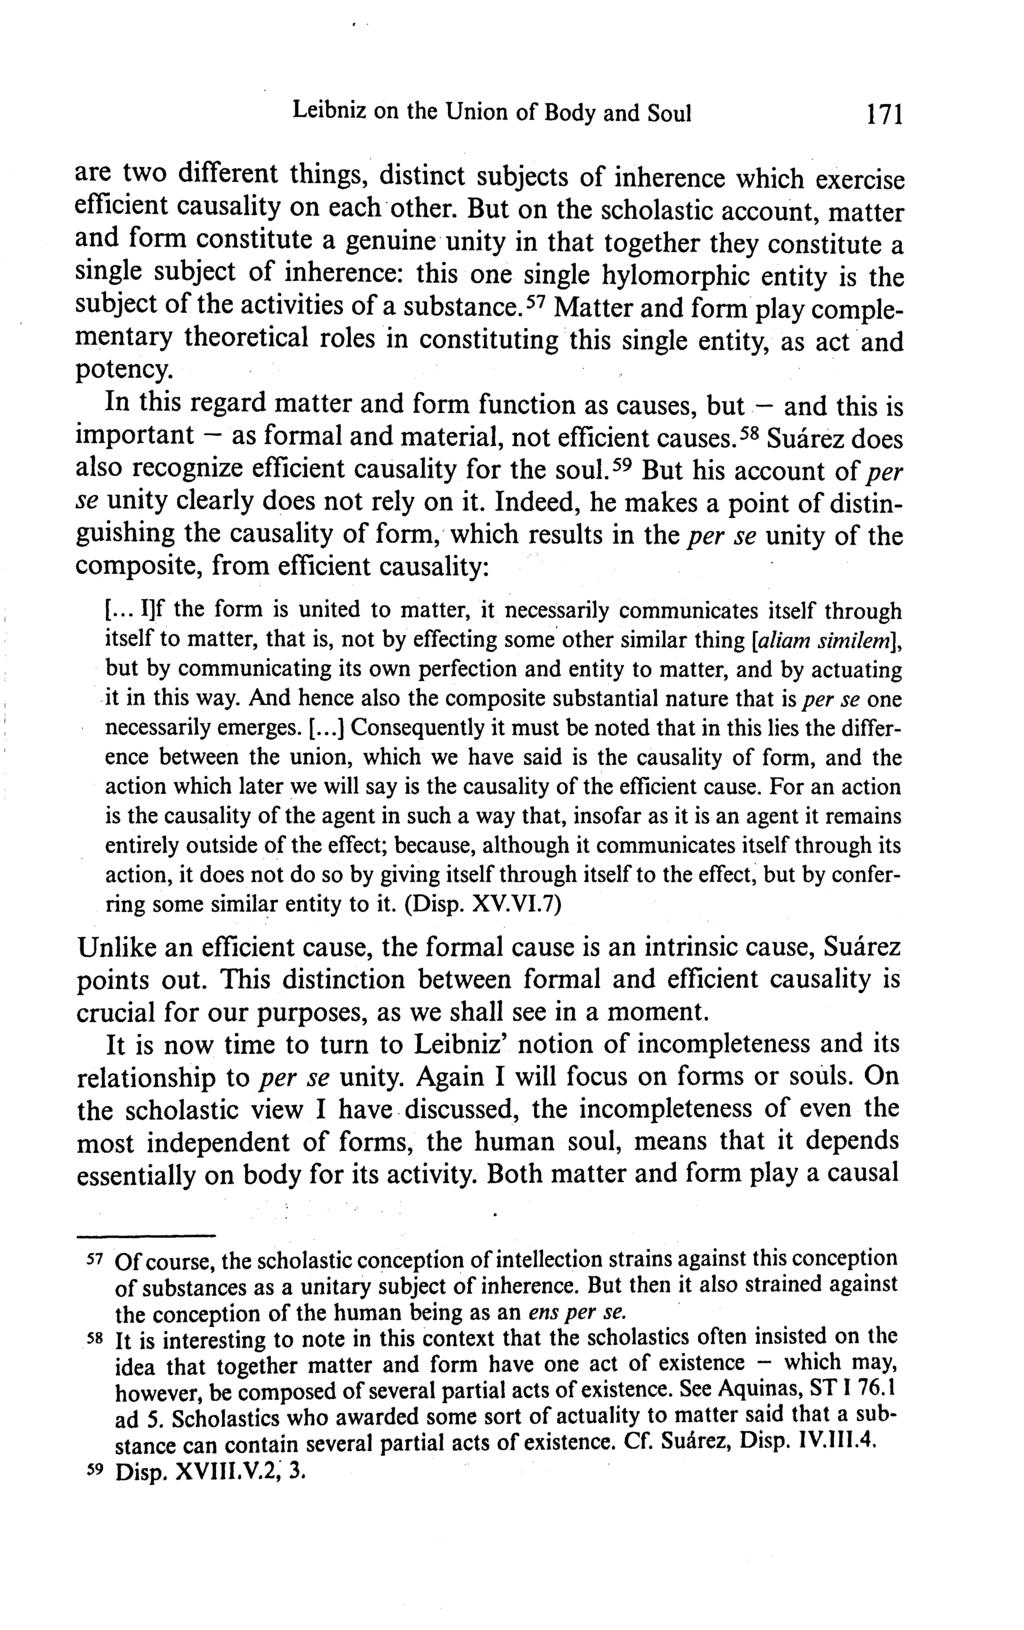 Leibniz on the Union of Body and Soul 171 are two different things, distinct subjects of inherence which exercise efficient causality on each other.